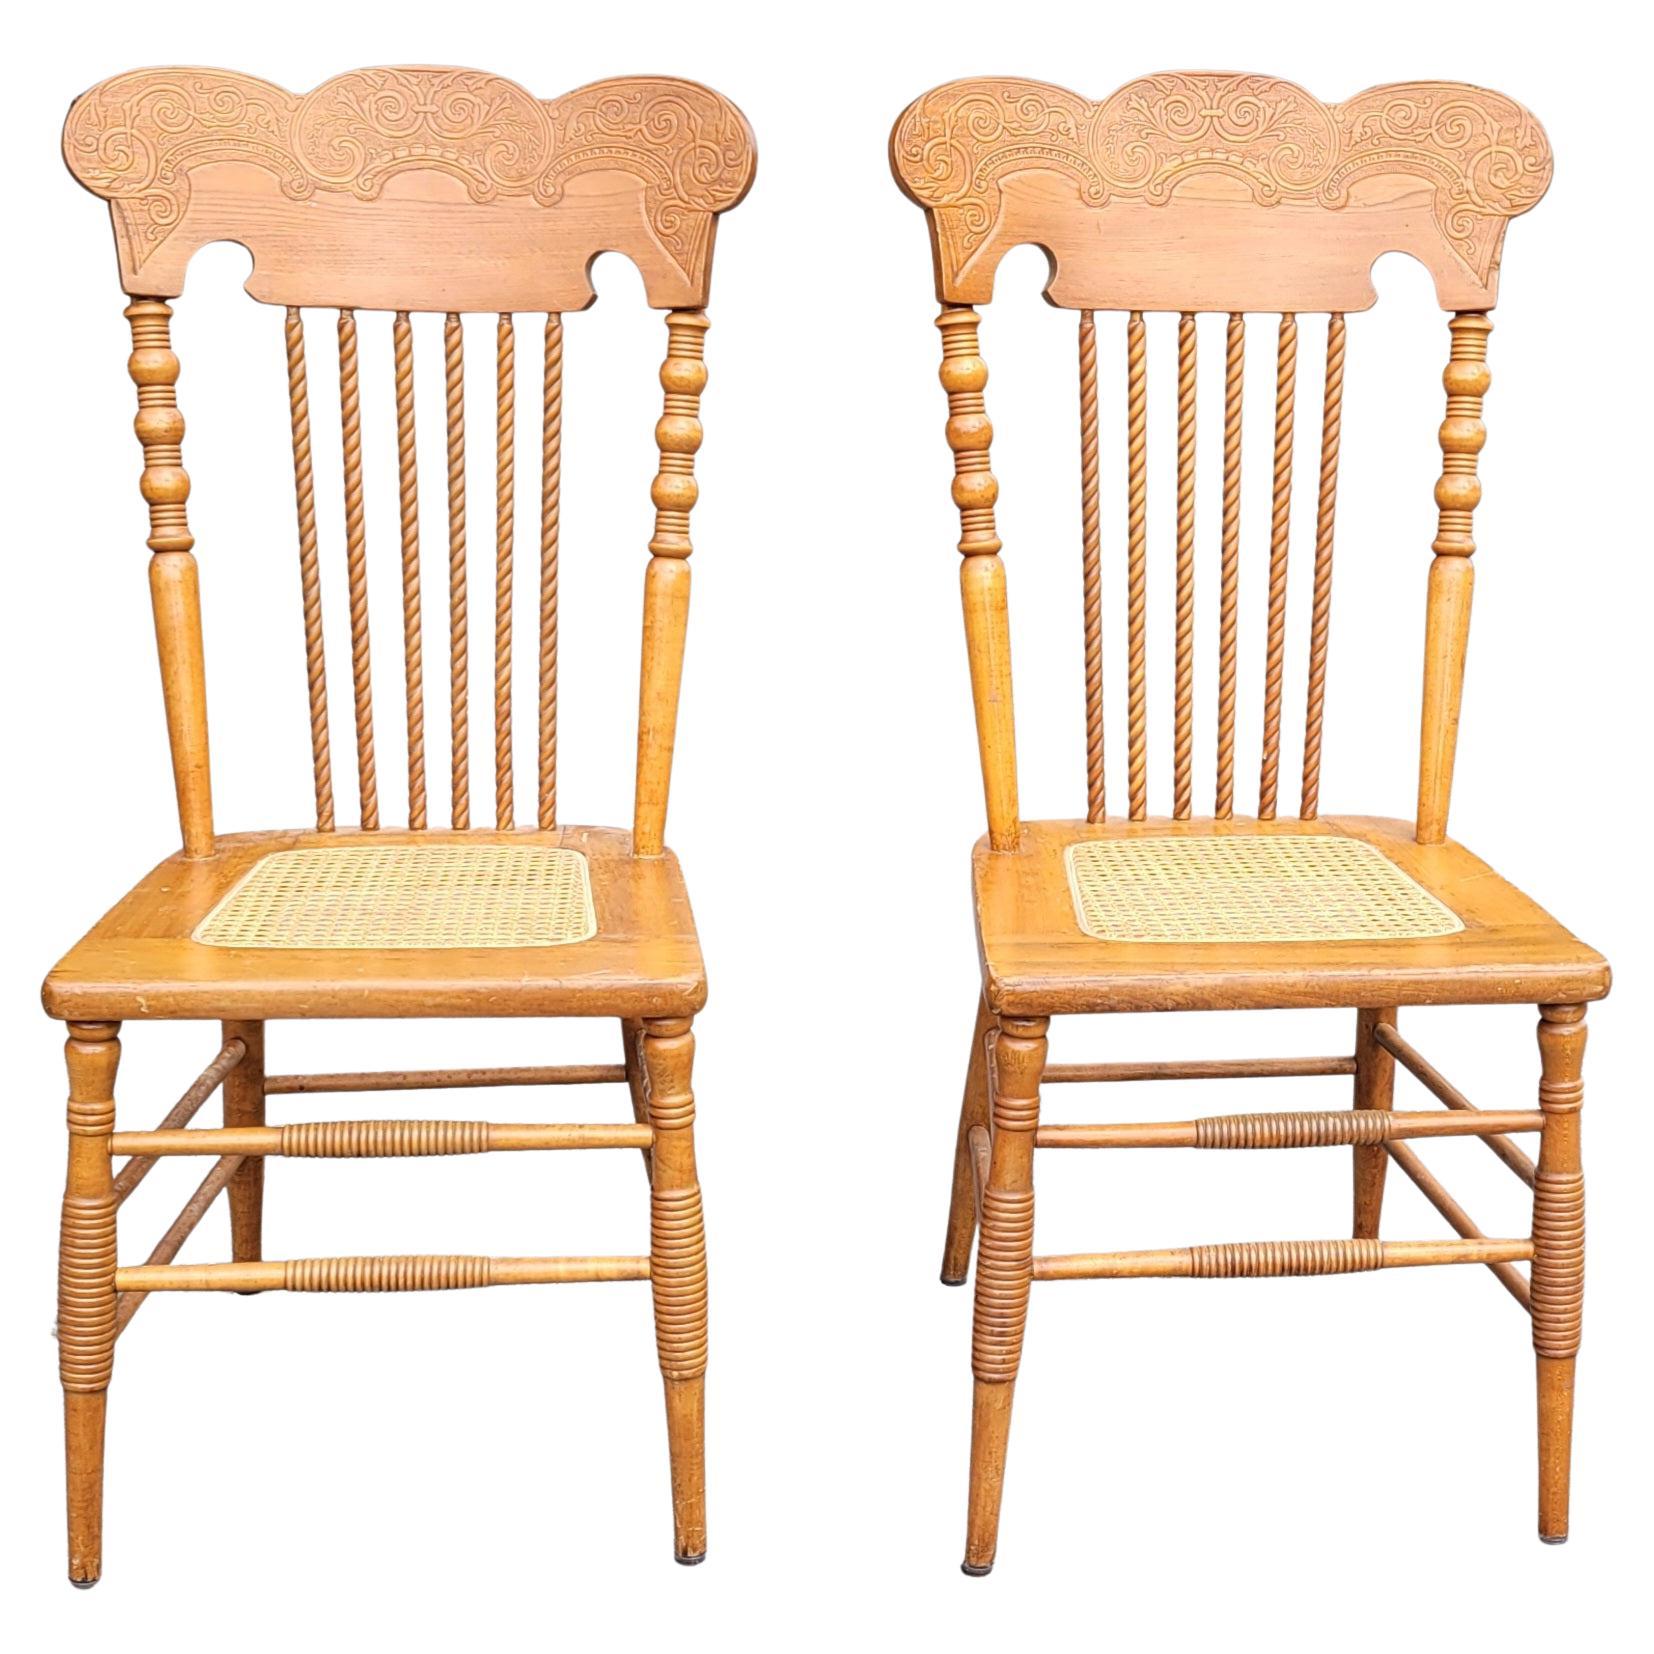 Refinished Pair of Victorian Style Press Back Spiral Maple Chairs with Cane Seat For Sale